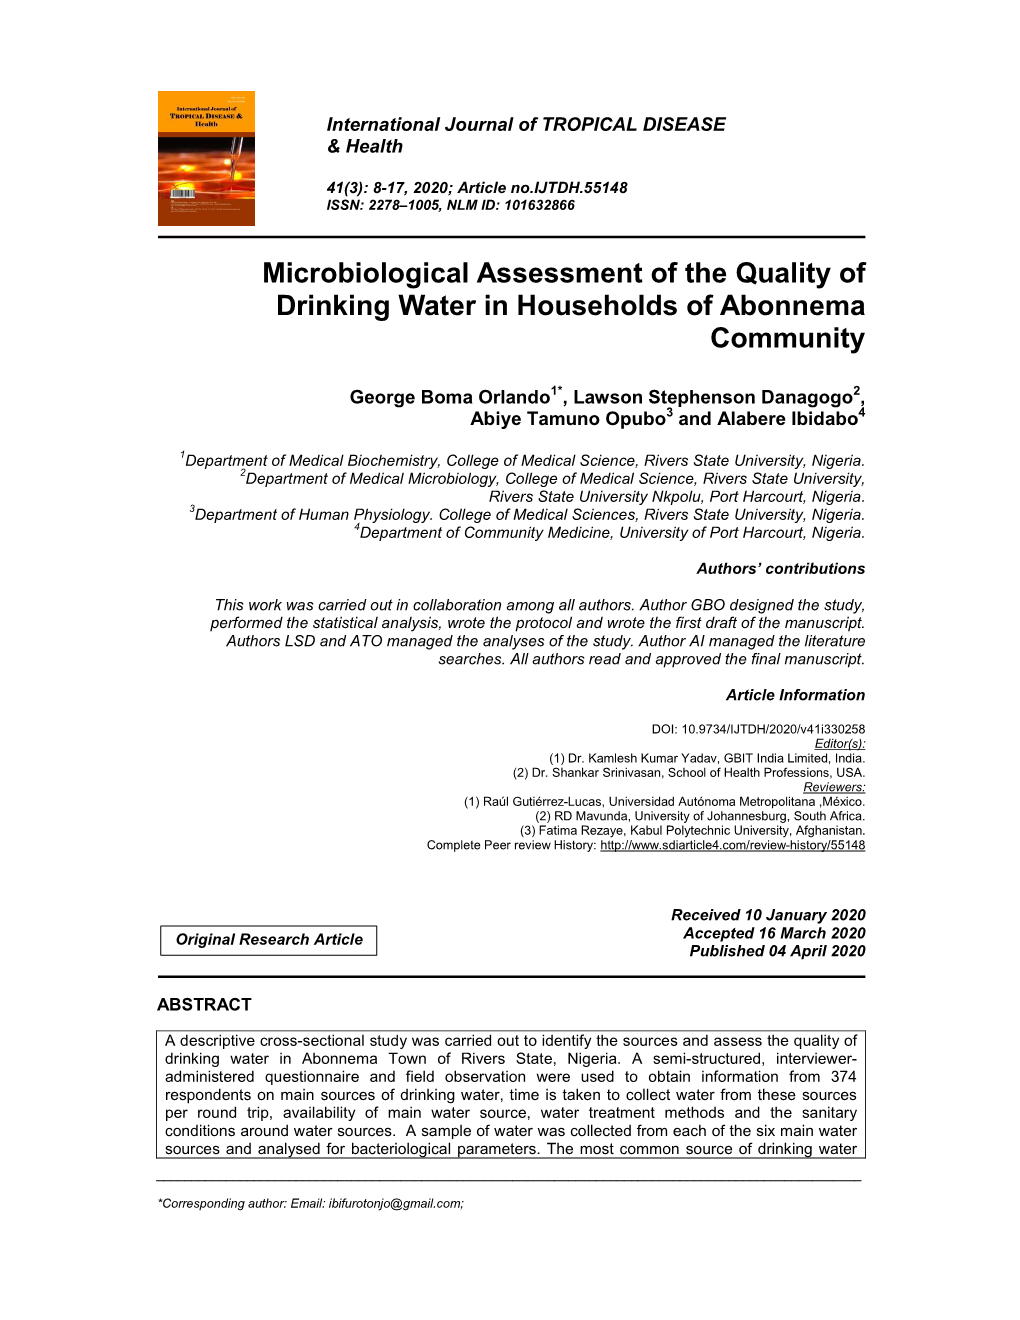 Microbiological Assessment of the Quality of Drinking Water in Households of Abonnema Community